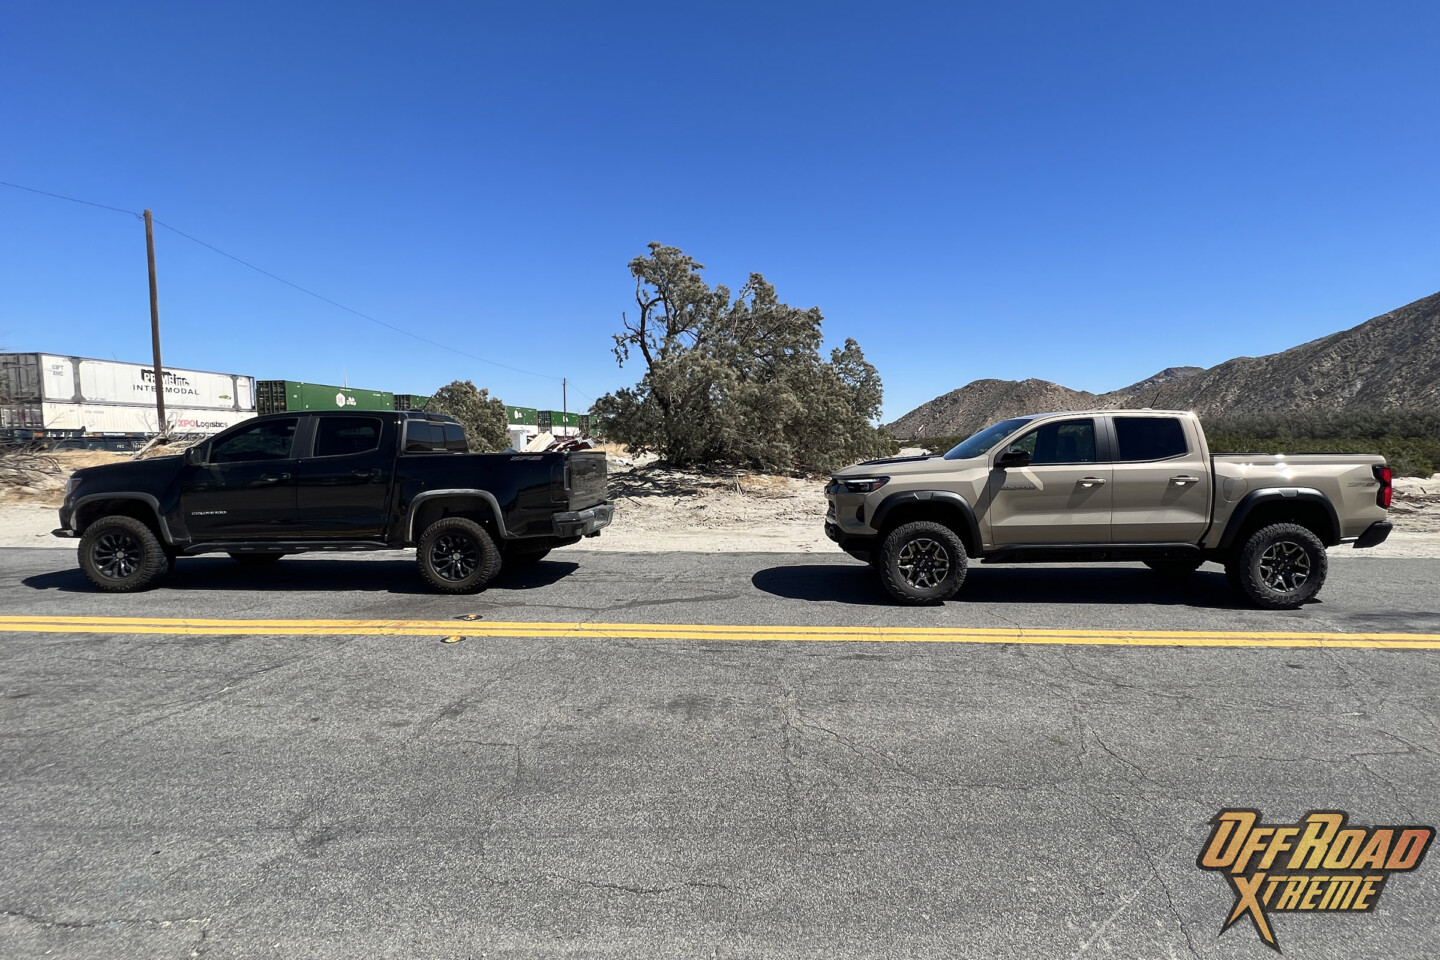 Driving New Chevrolet ZR2 Trucks Through King Of The Hammers